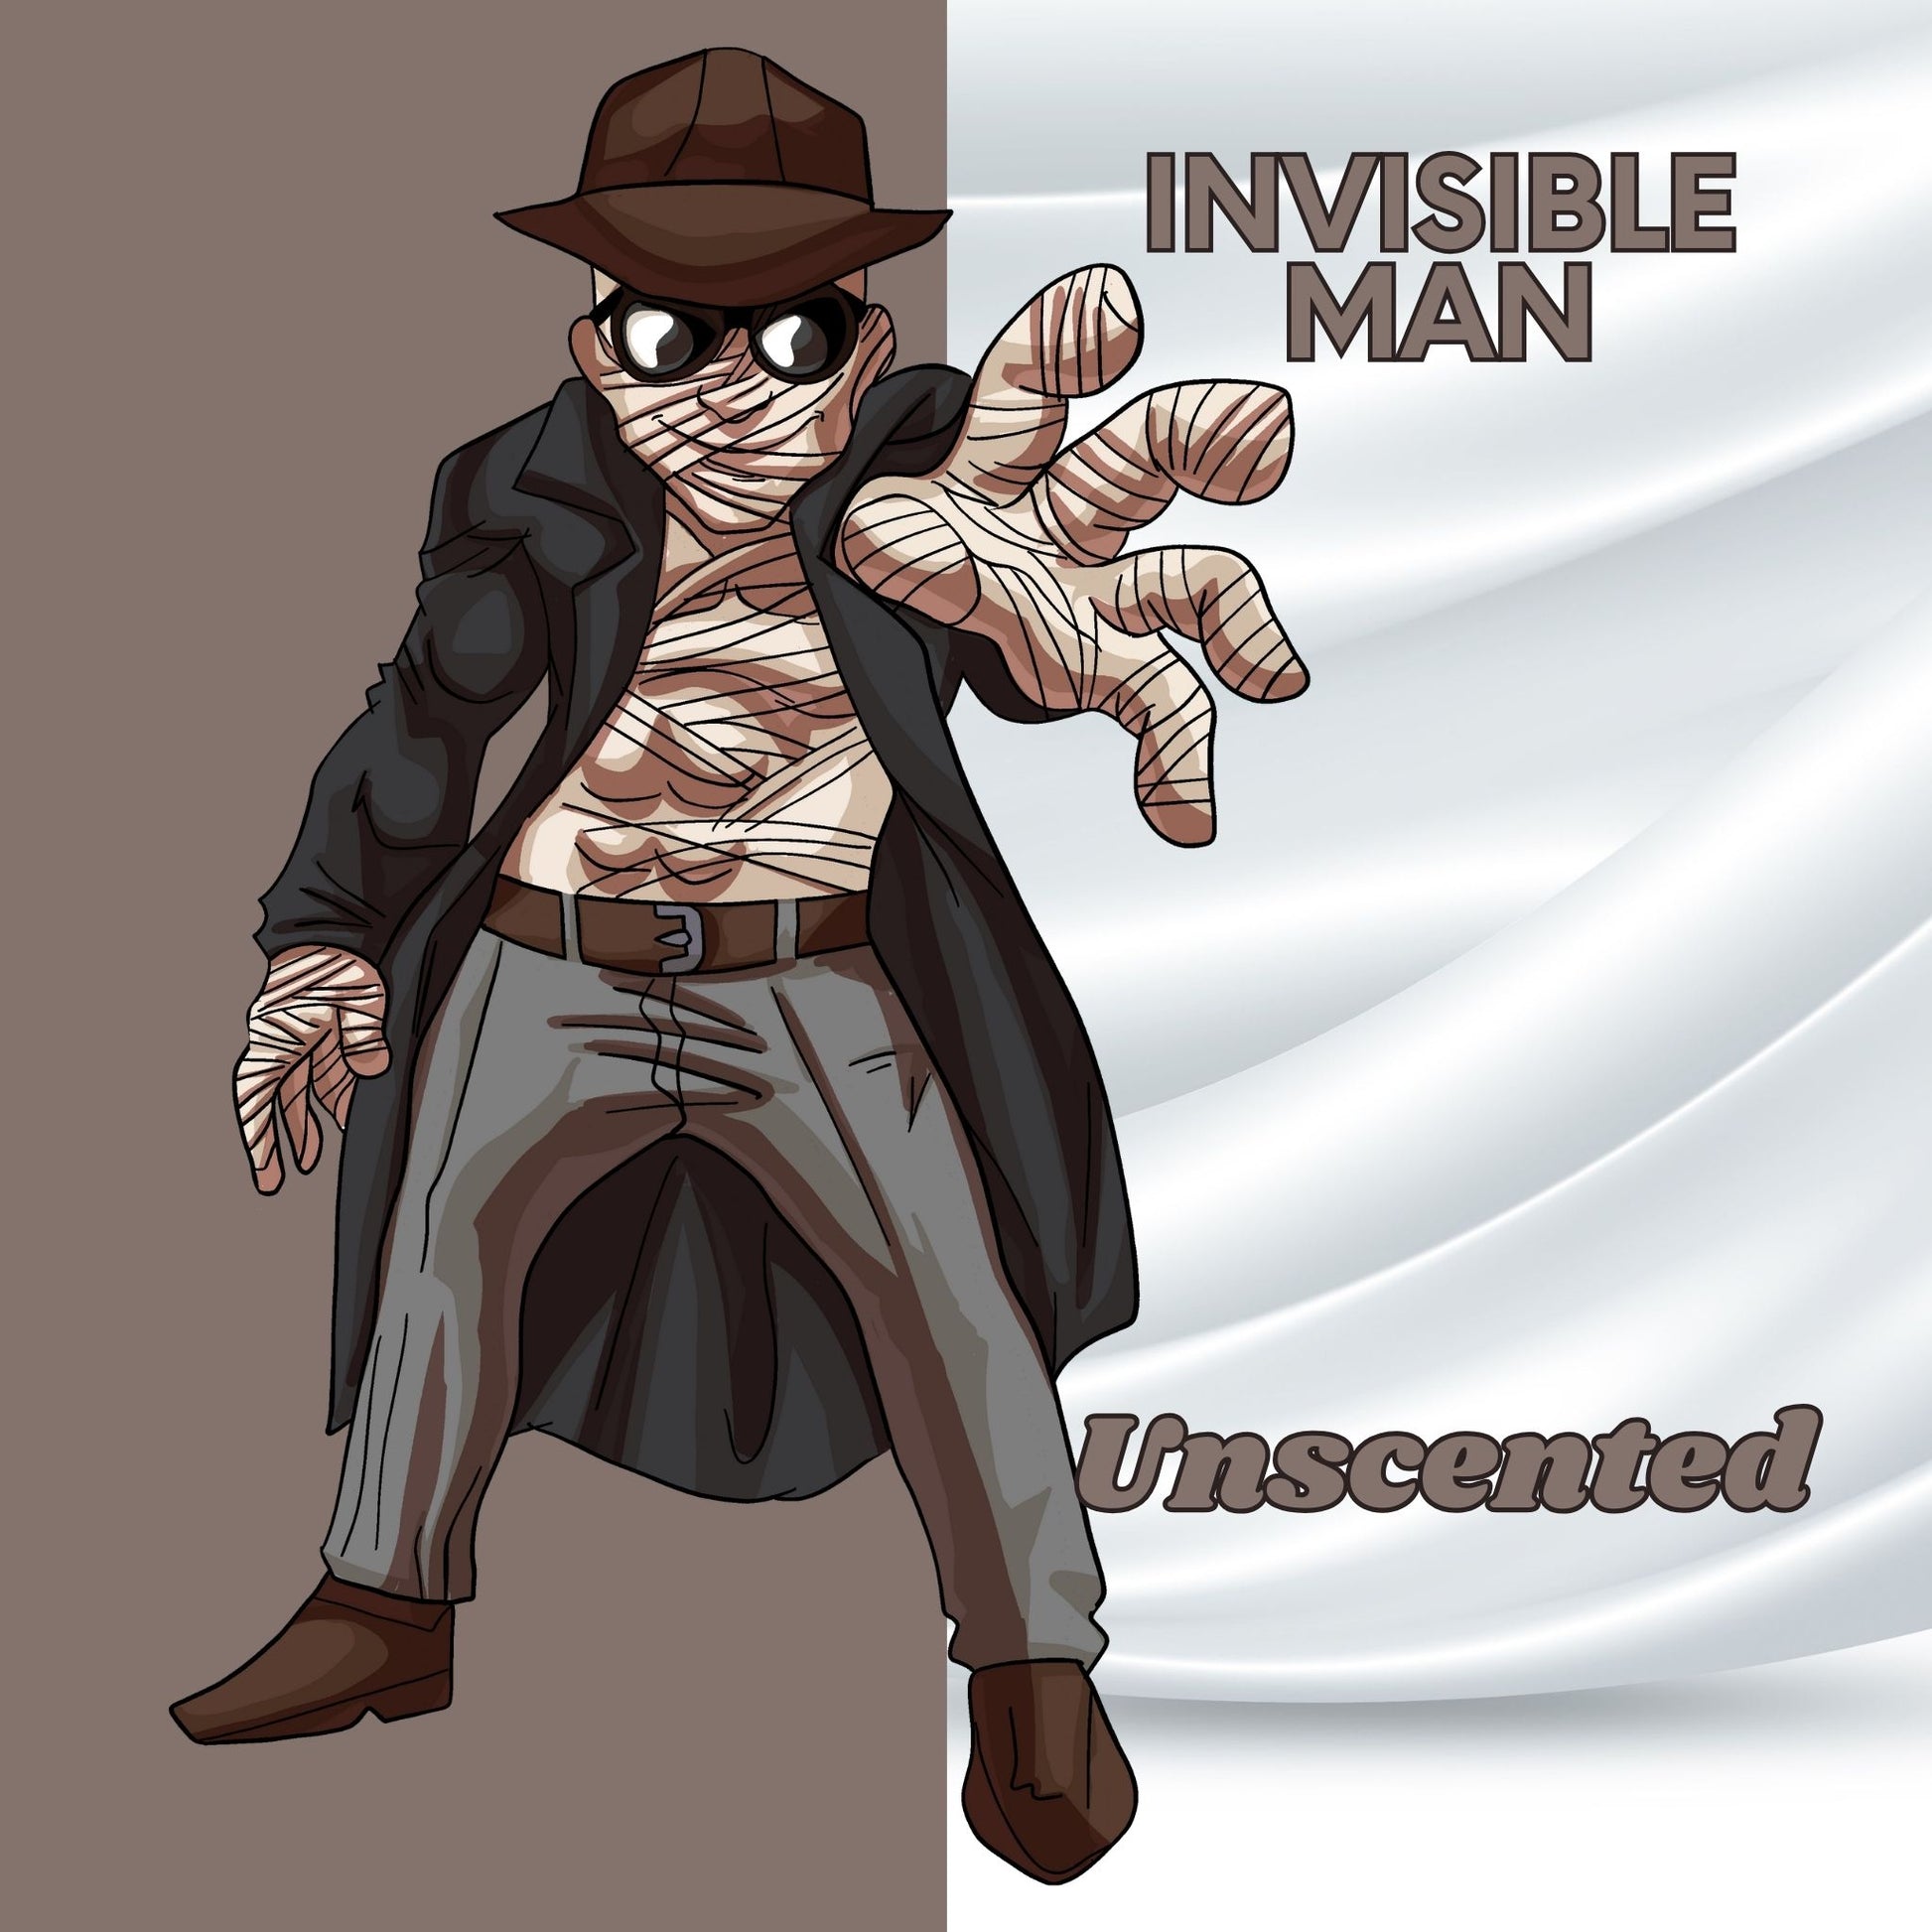 Invisible Man - Unscented